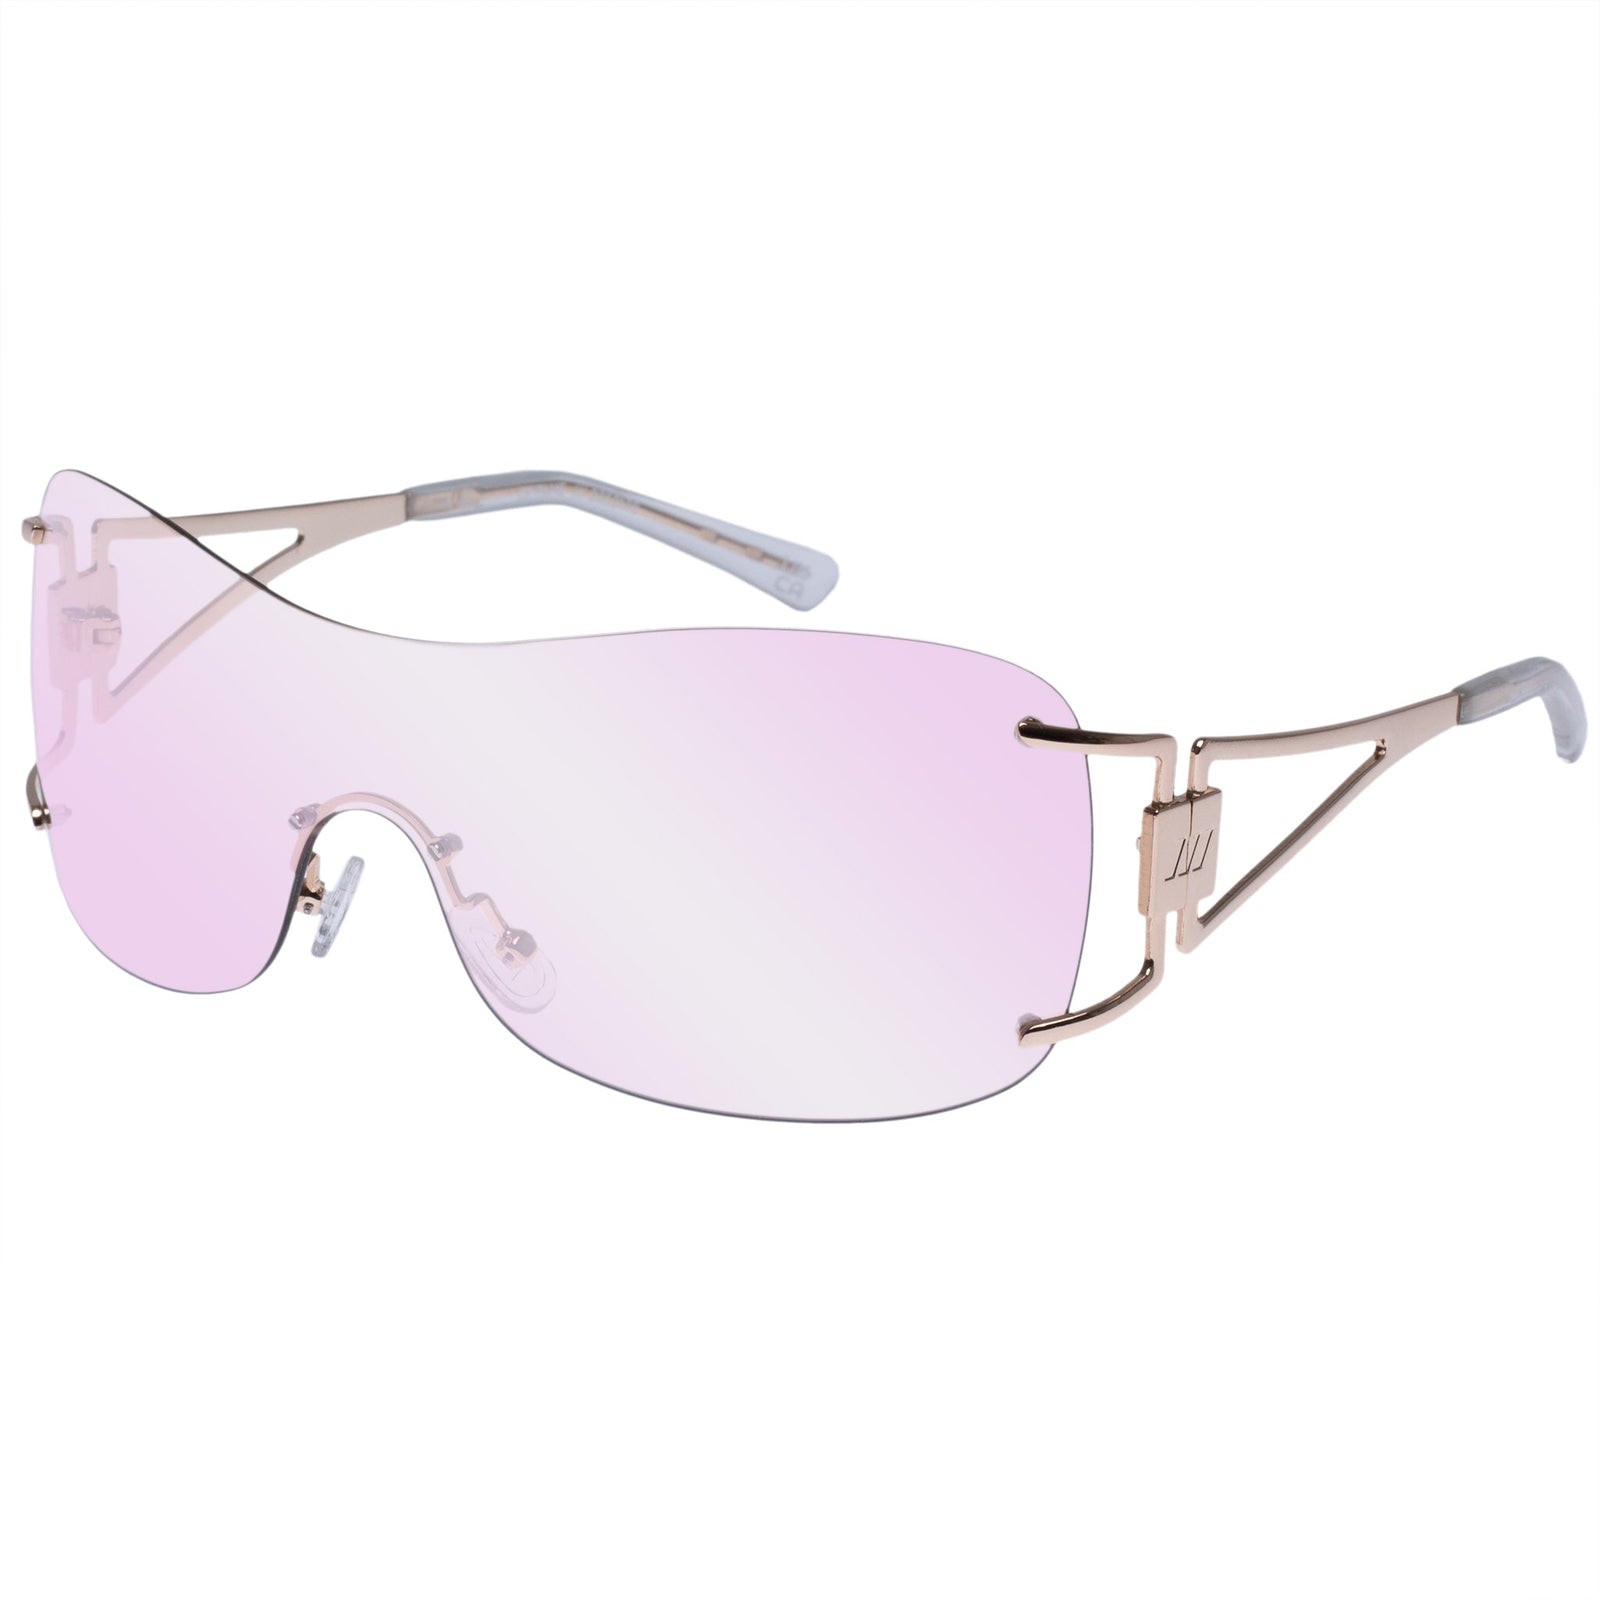 ALAÏA Gold Aviator Sunglasses In Metal And Leather